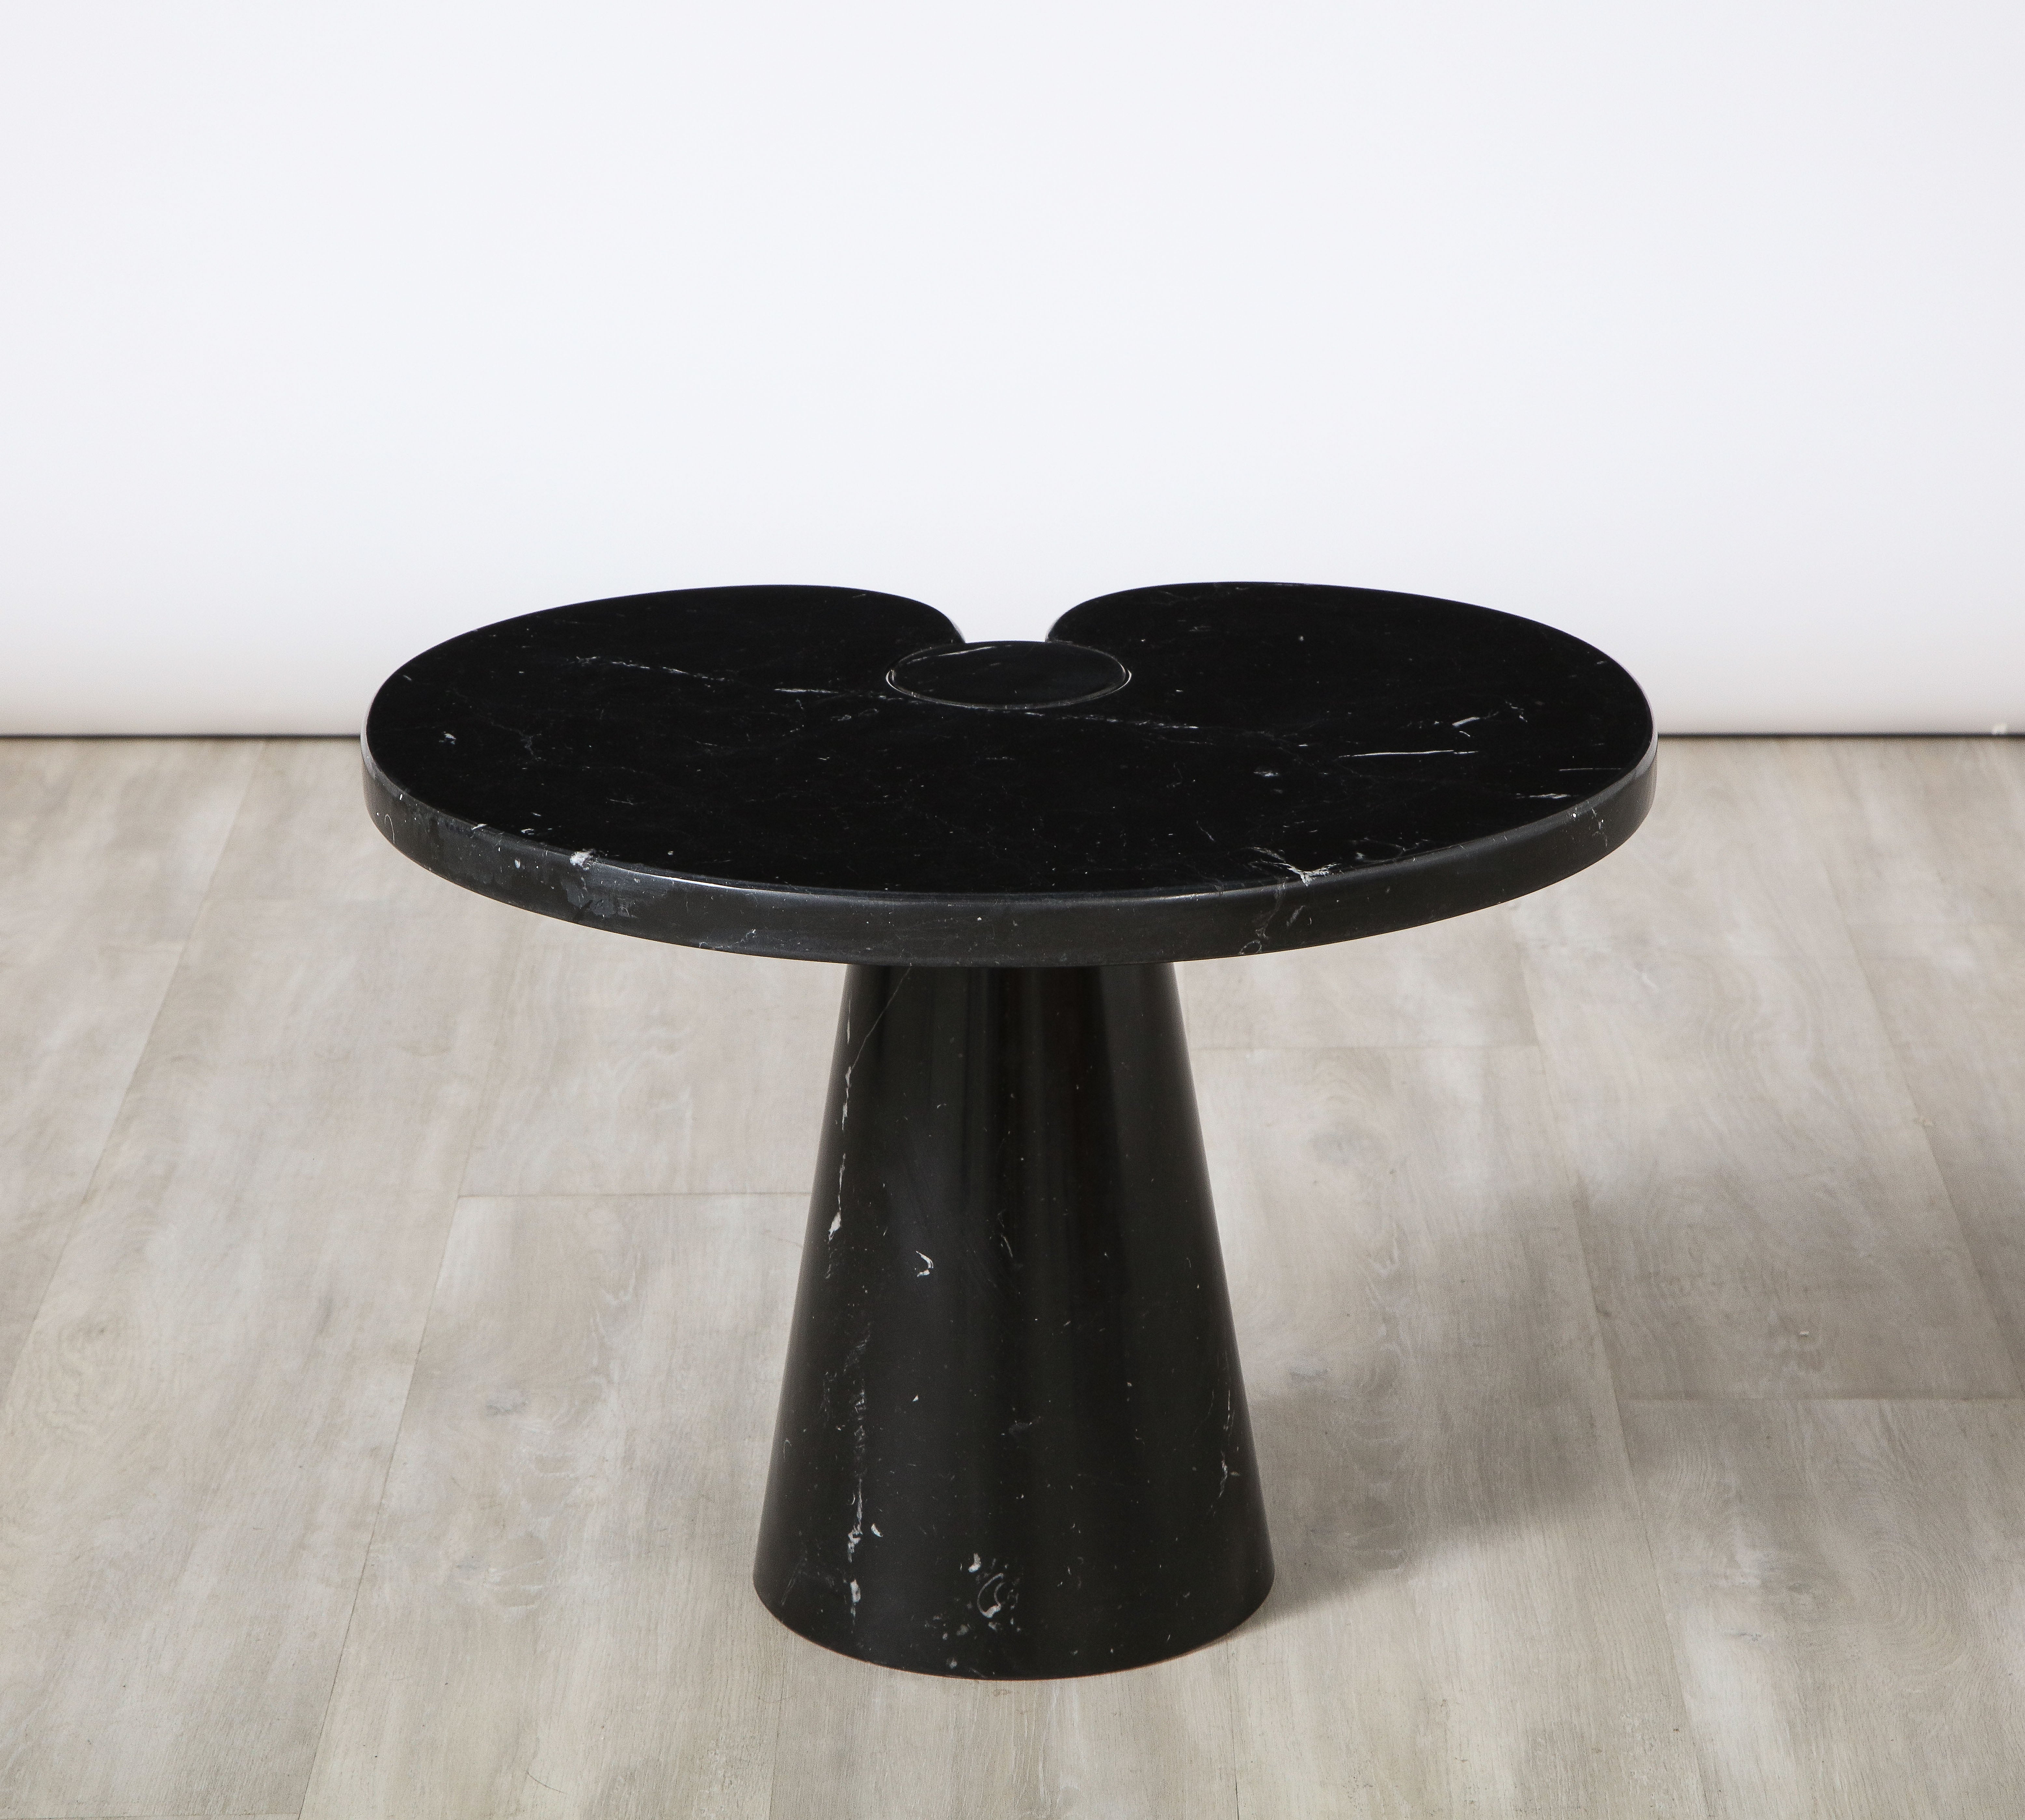 Angelo Mangiarotti for Skipper 'Eros' Series Nero marquina marble side table, 1971. Designed by Angelo Mangiarotti for Skipper, the 'Eros' series, this iconic Nero Marquina side table is supported on one conical leg base, with beautiful subtle